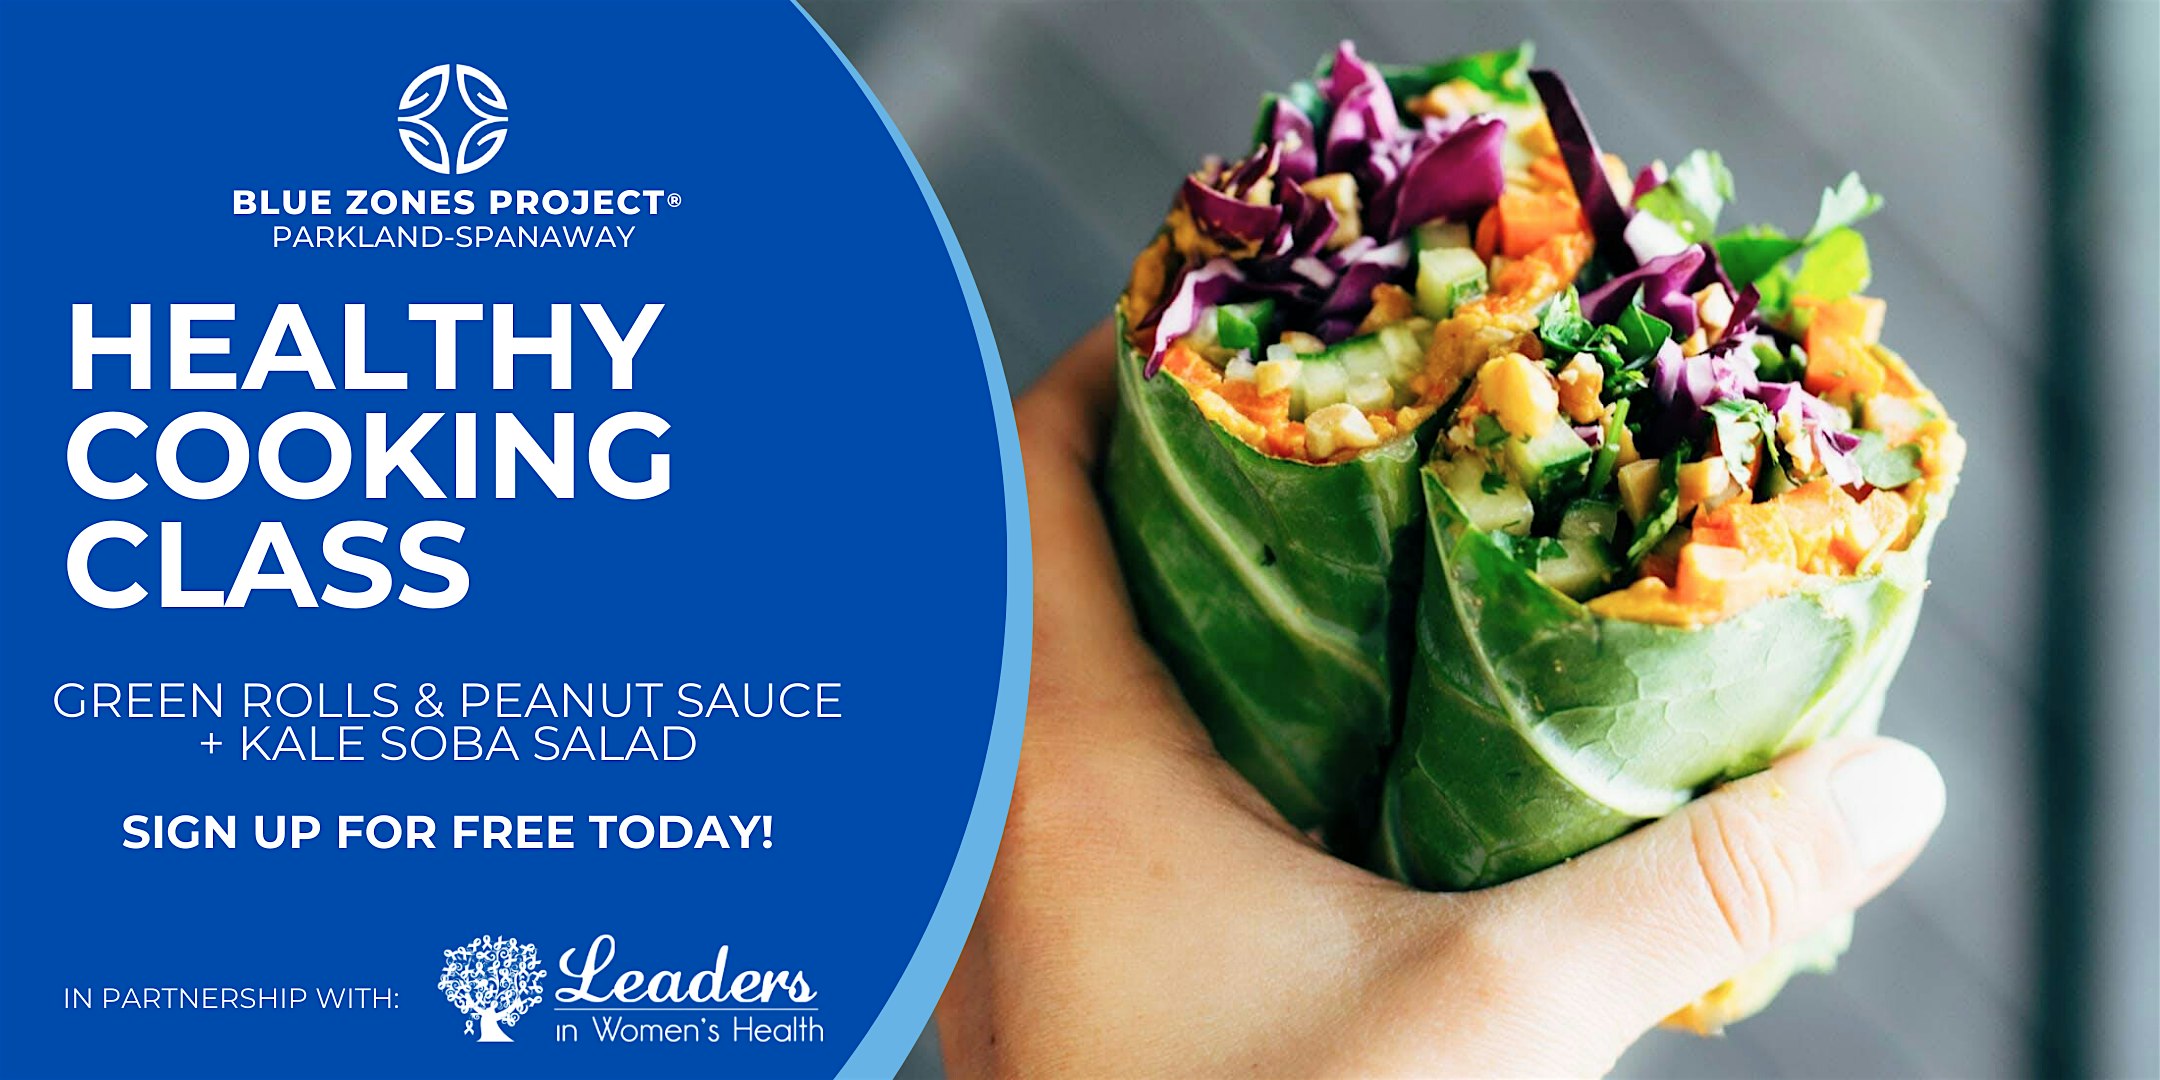 Make Green Rolls & Peanut Sauce with Blue Zones Project Parkland-Spanaway